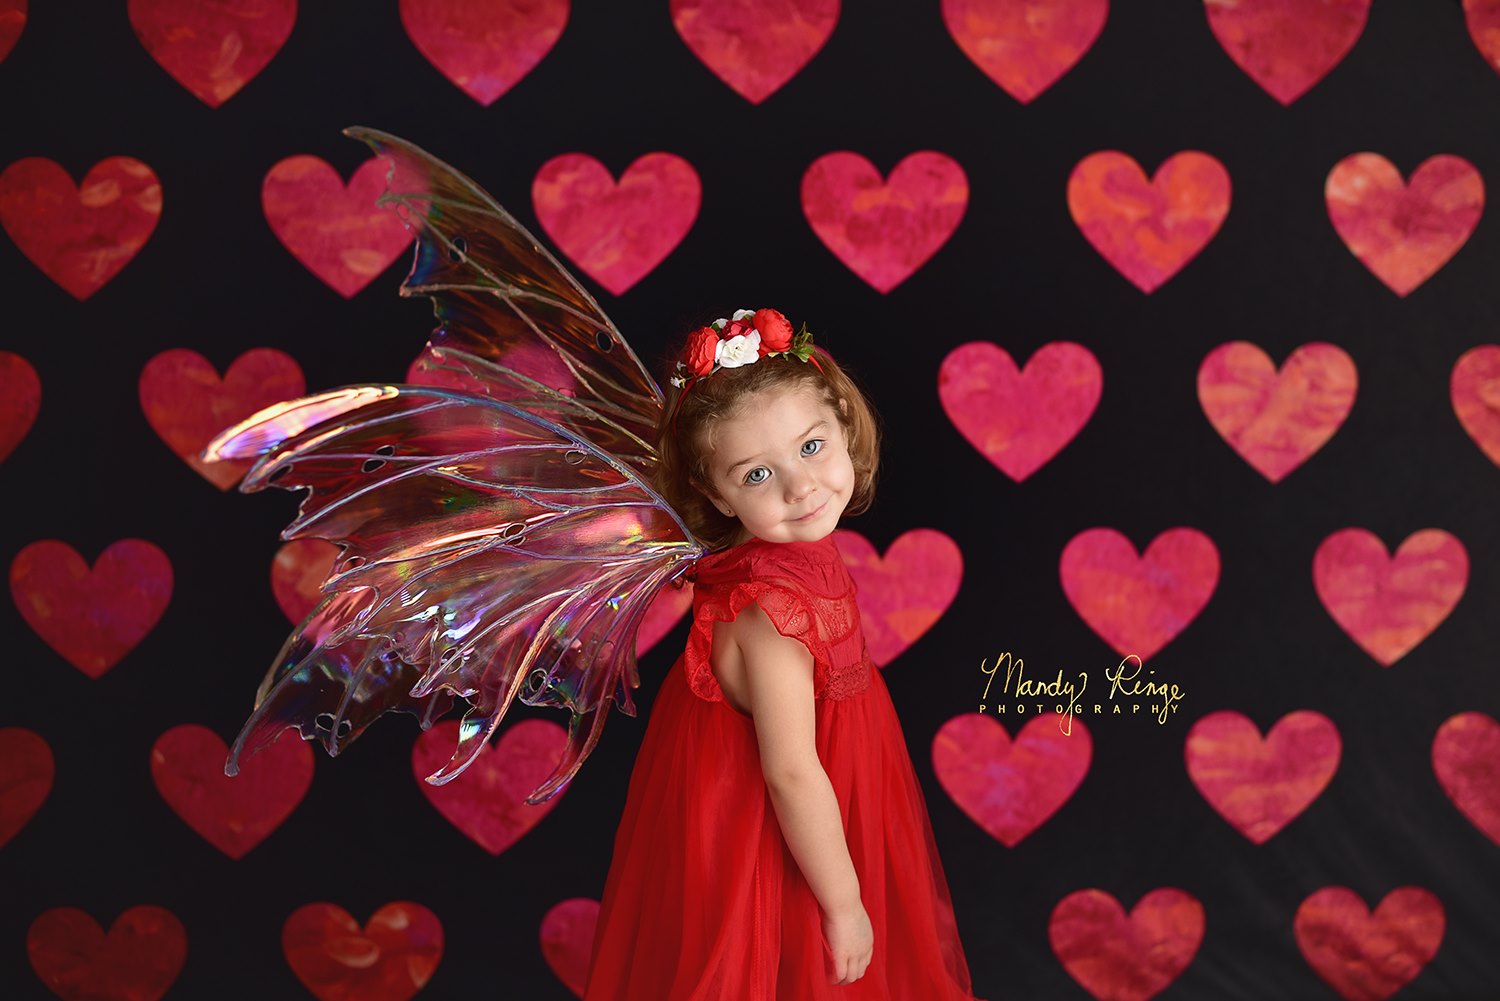 Kate Painted Heart Pattern Valentines Backdrop Designed By Mandy Ringe Photography